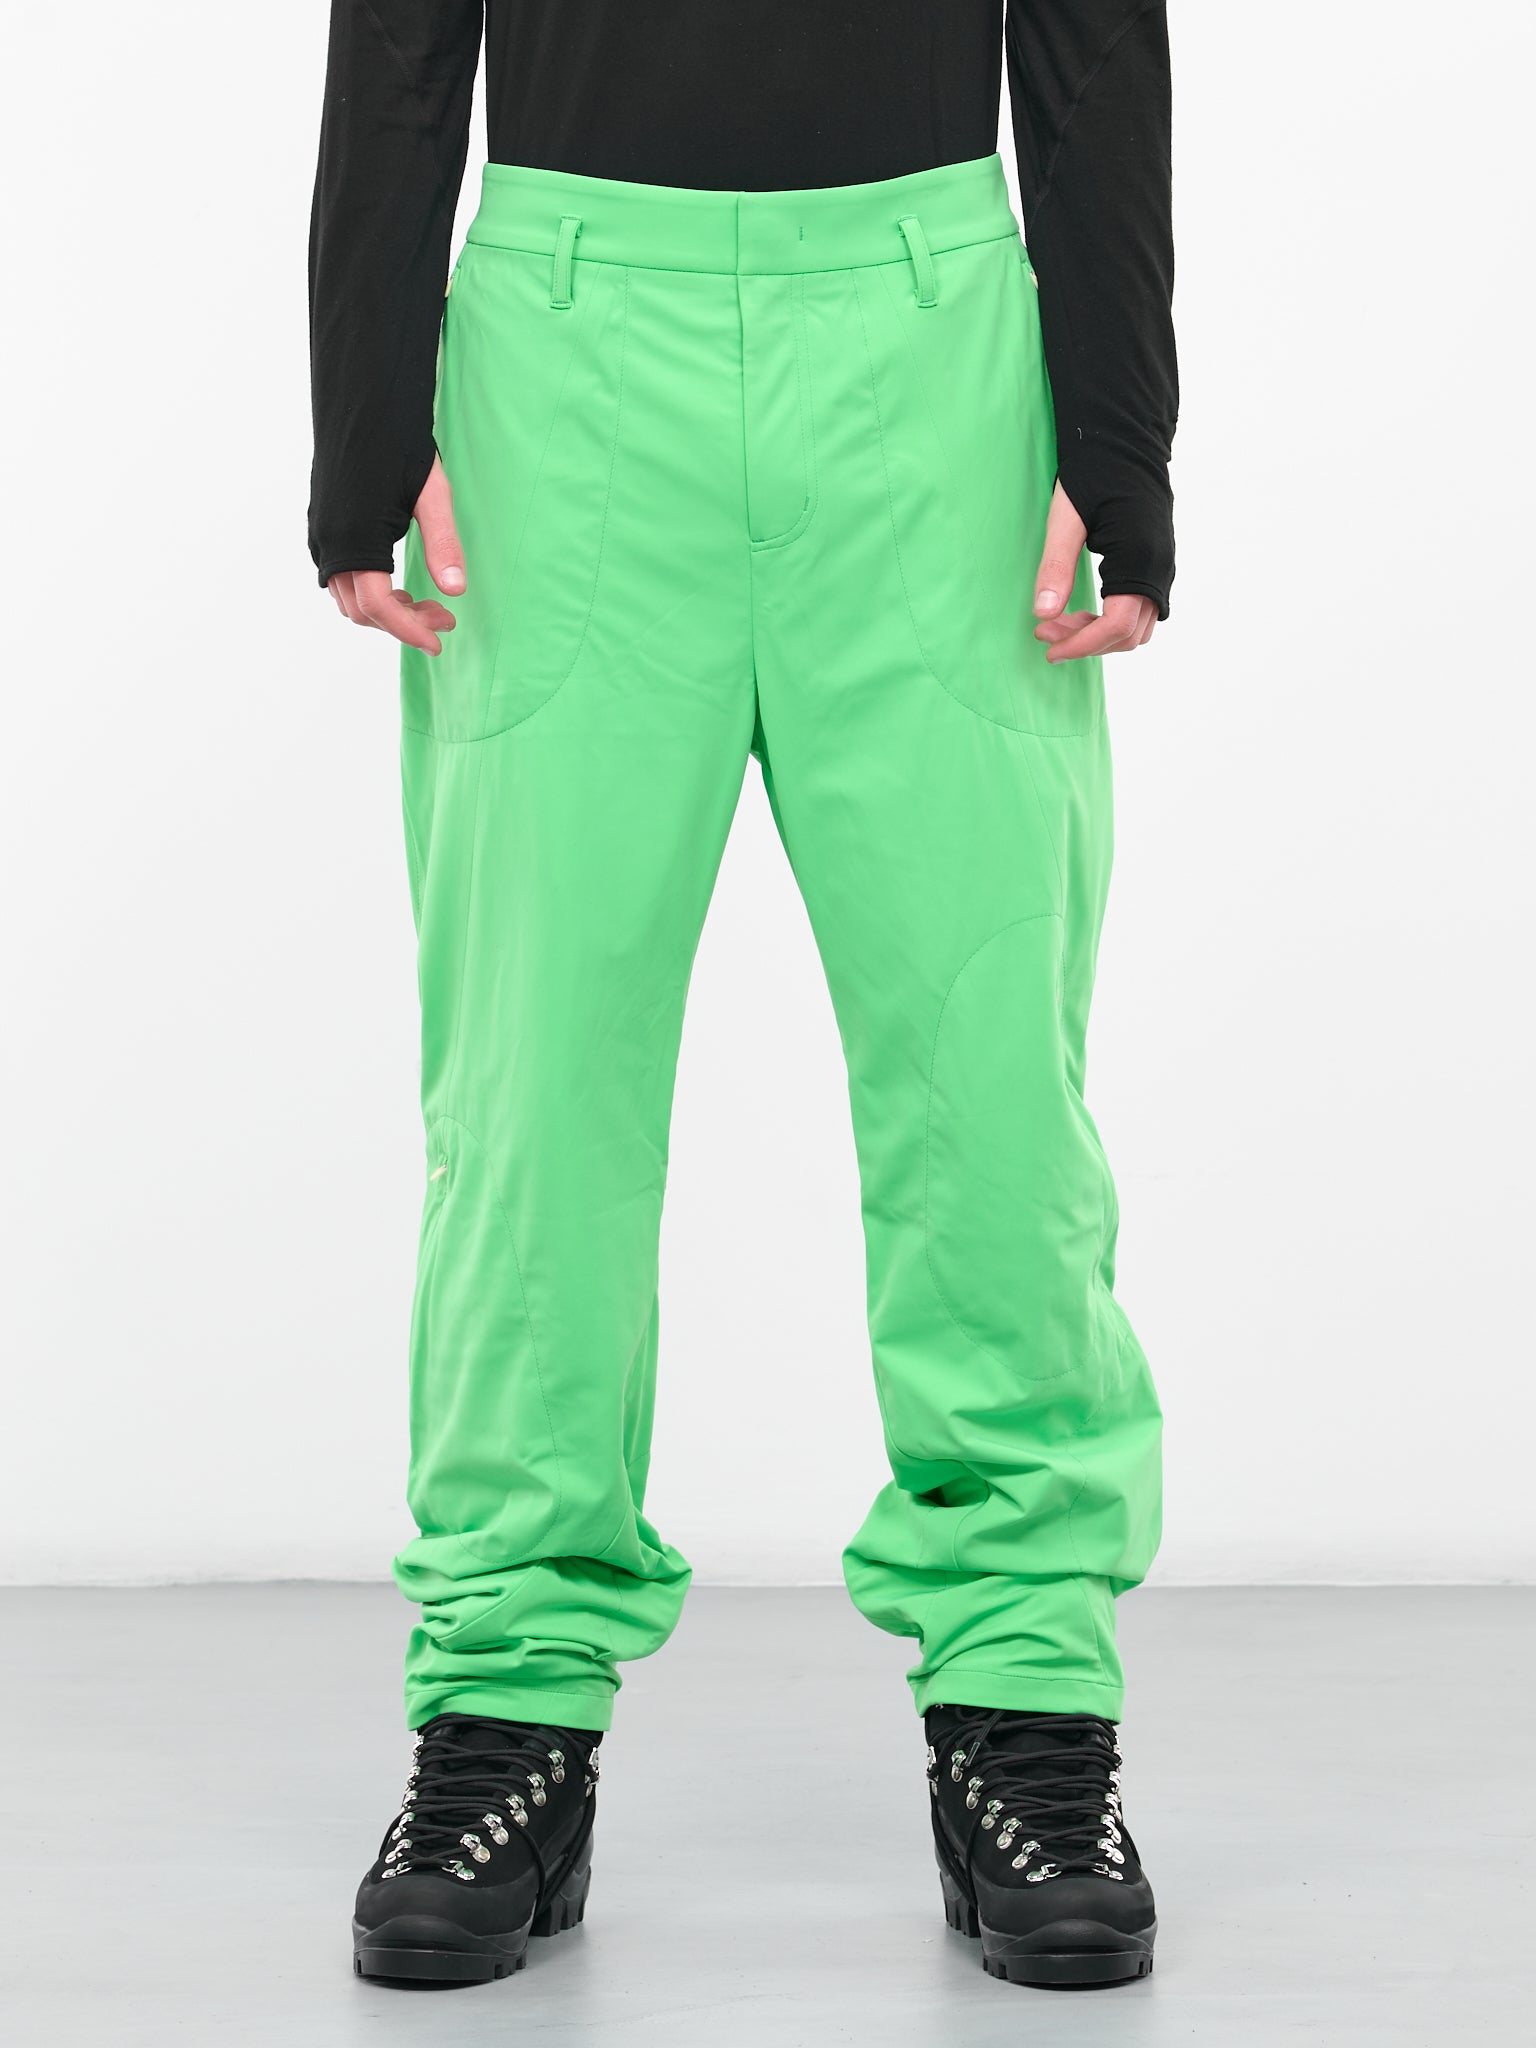 5.1 Center Trousers (BTCNG-NEON-GREEN)